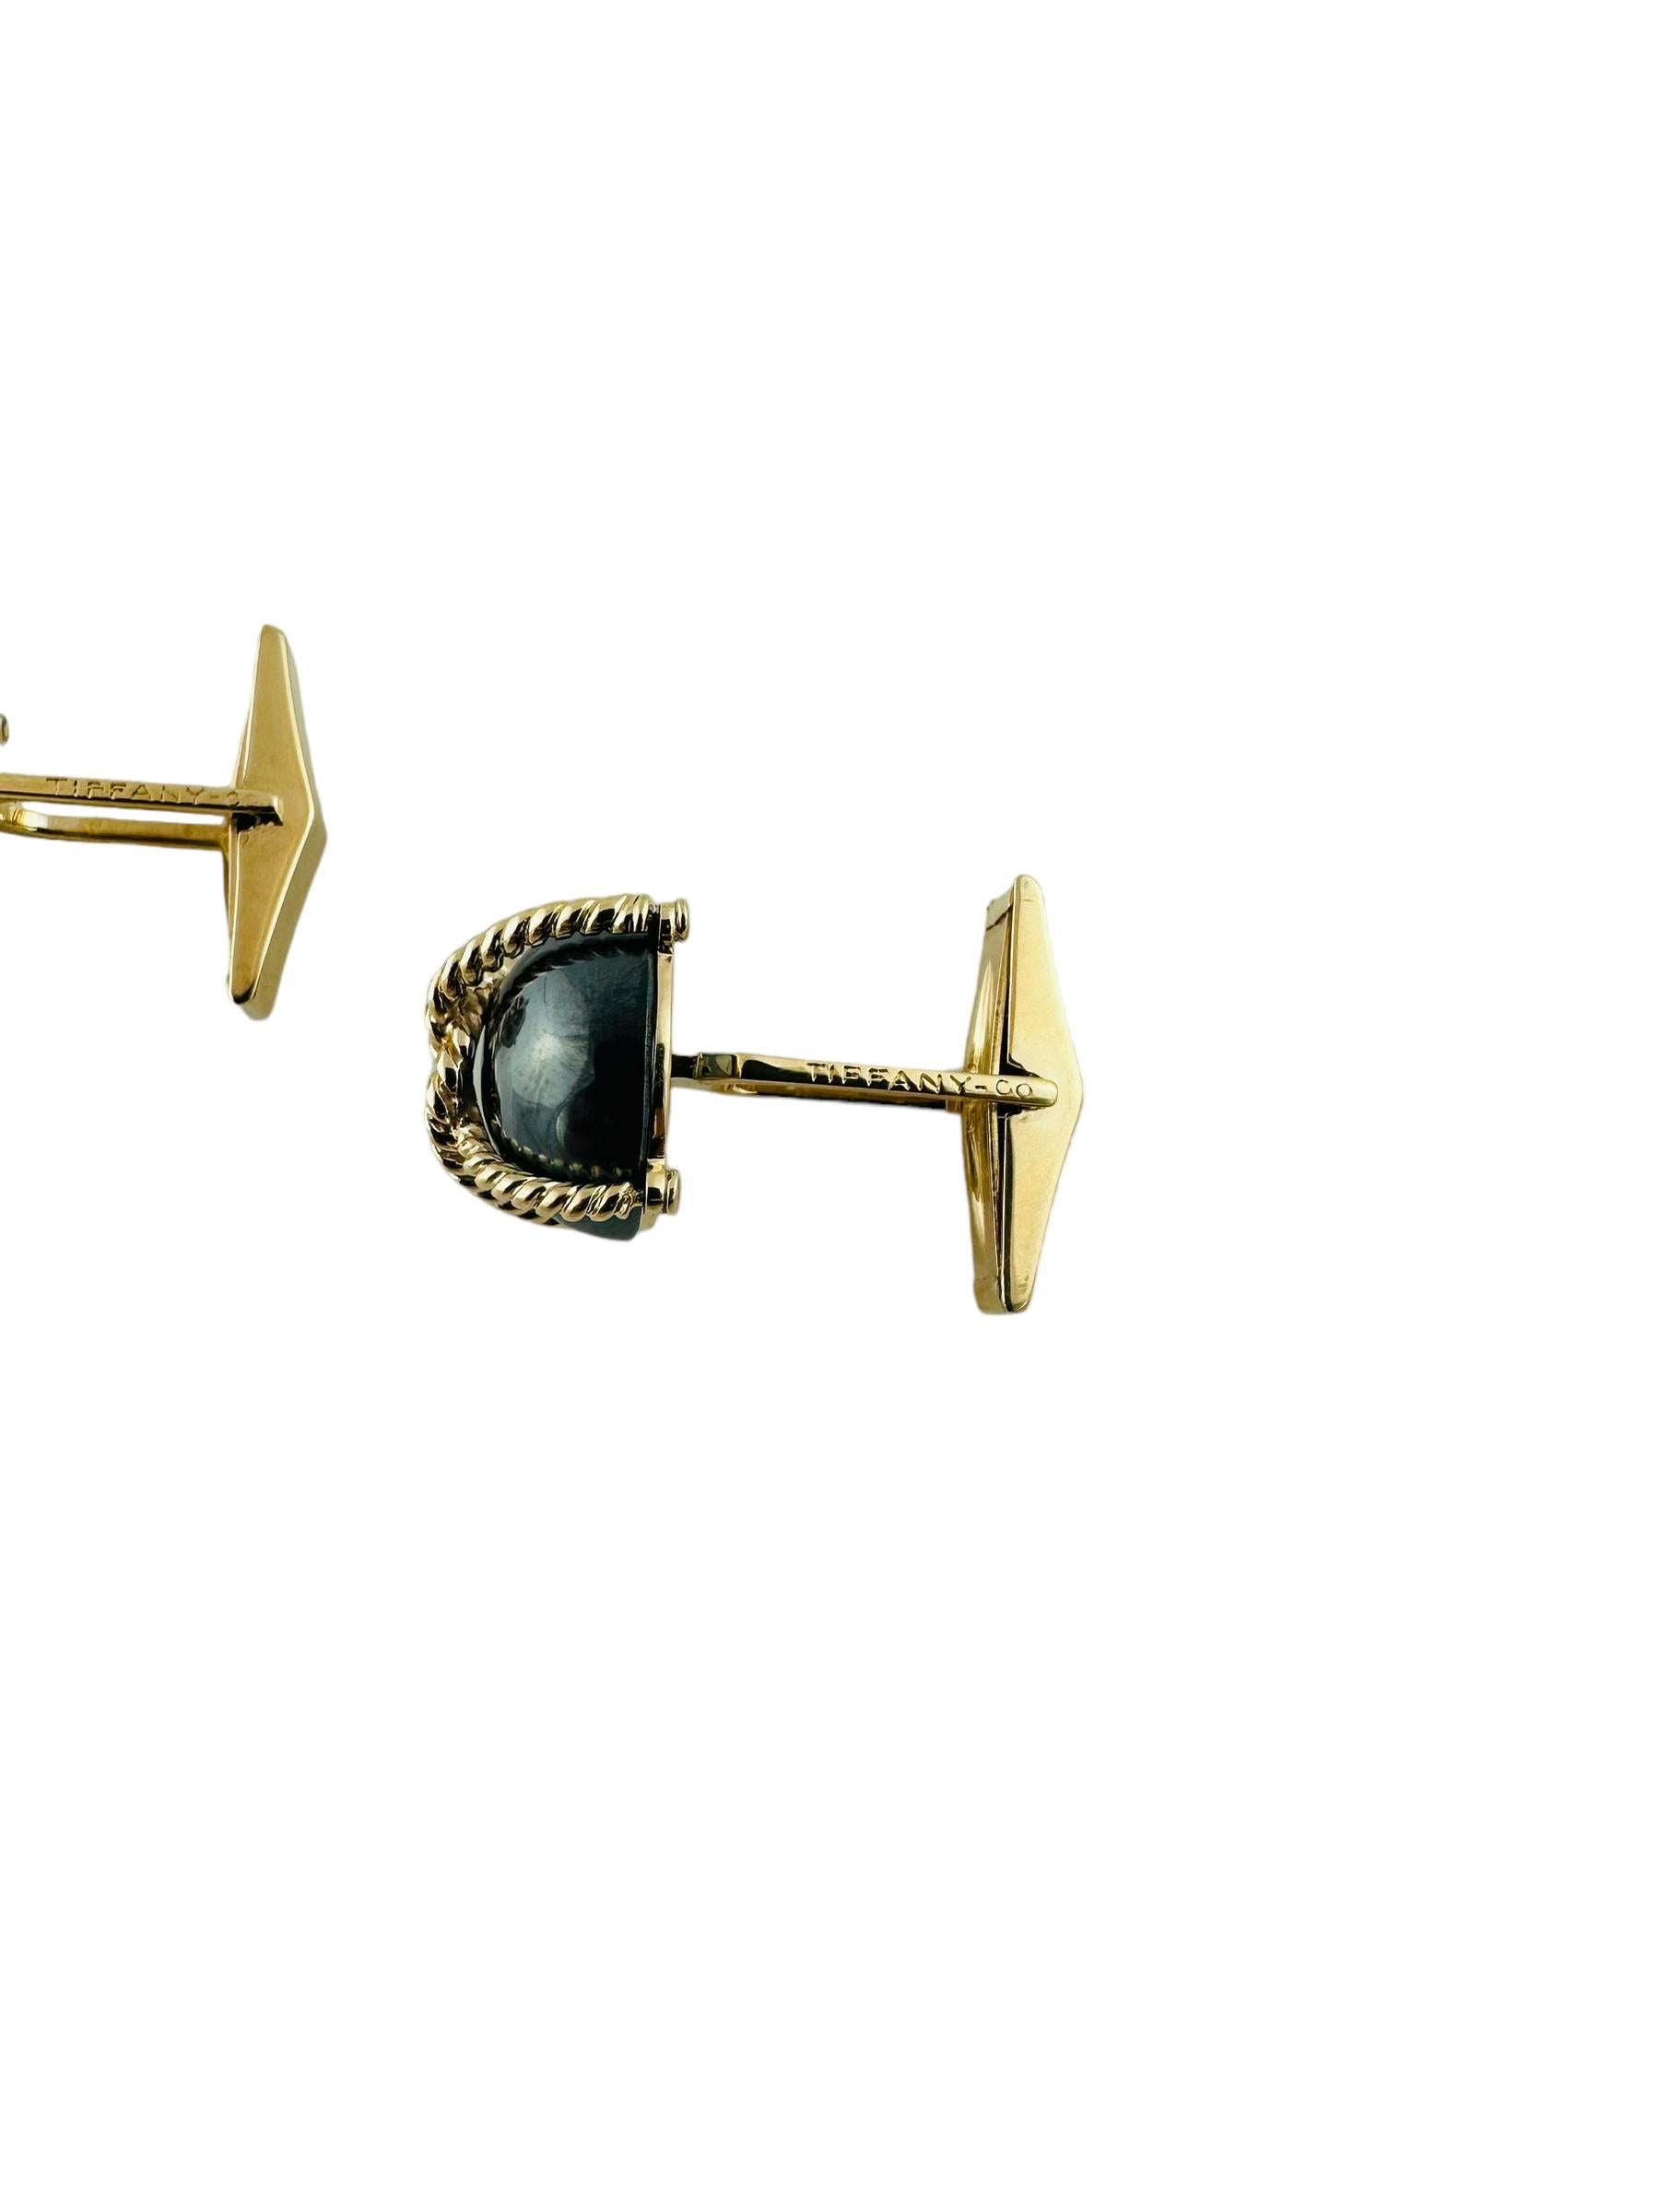 Vintage Tiffany & Co. 14K Yellow Gold Hematite Cable Cufflinks For Sale 1